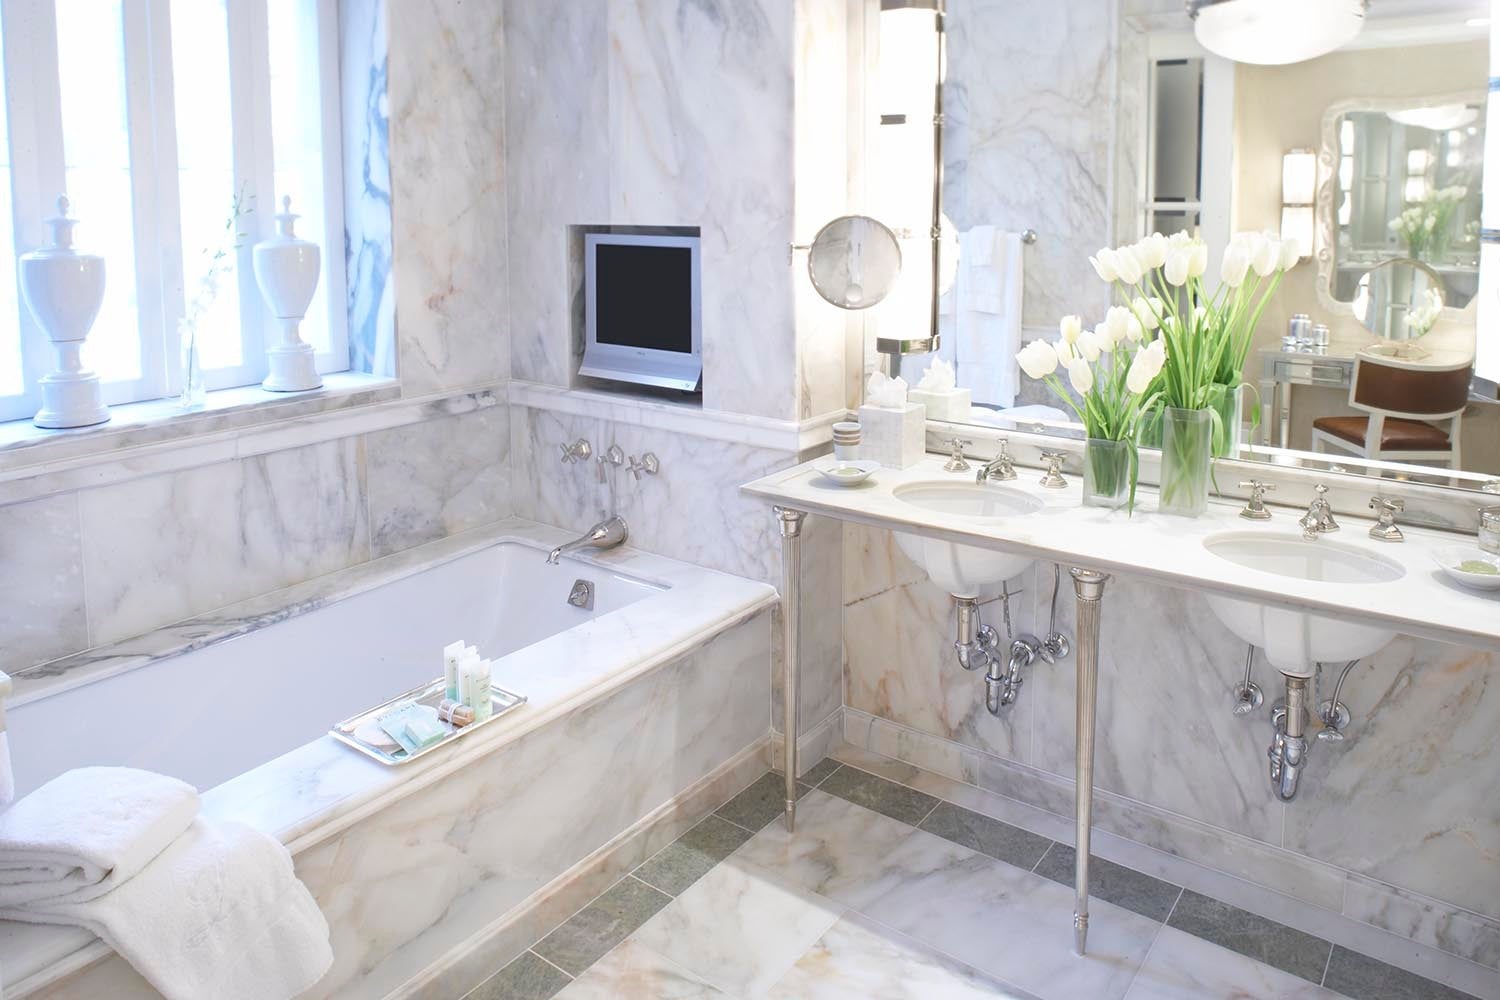 The marble bathtub in The Lowell's penthouse